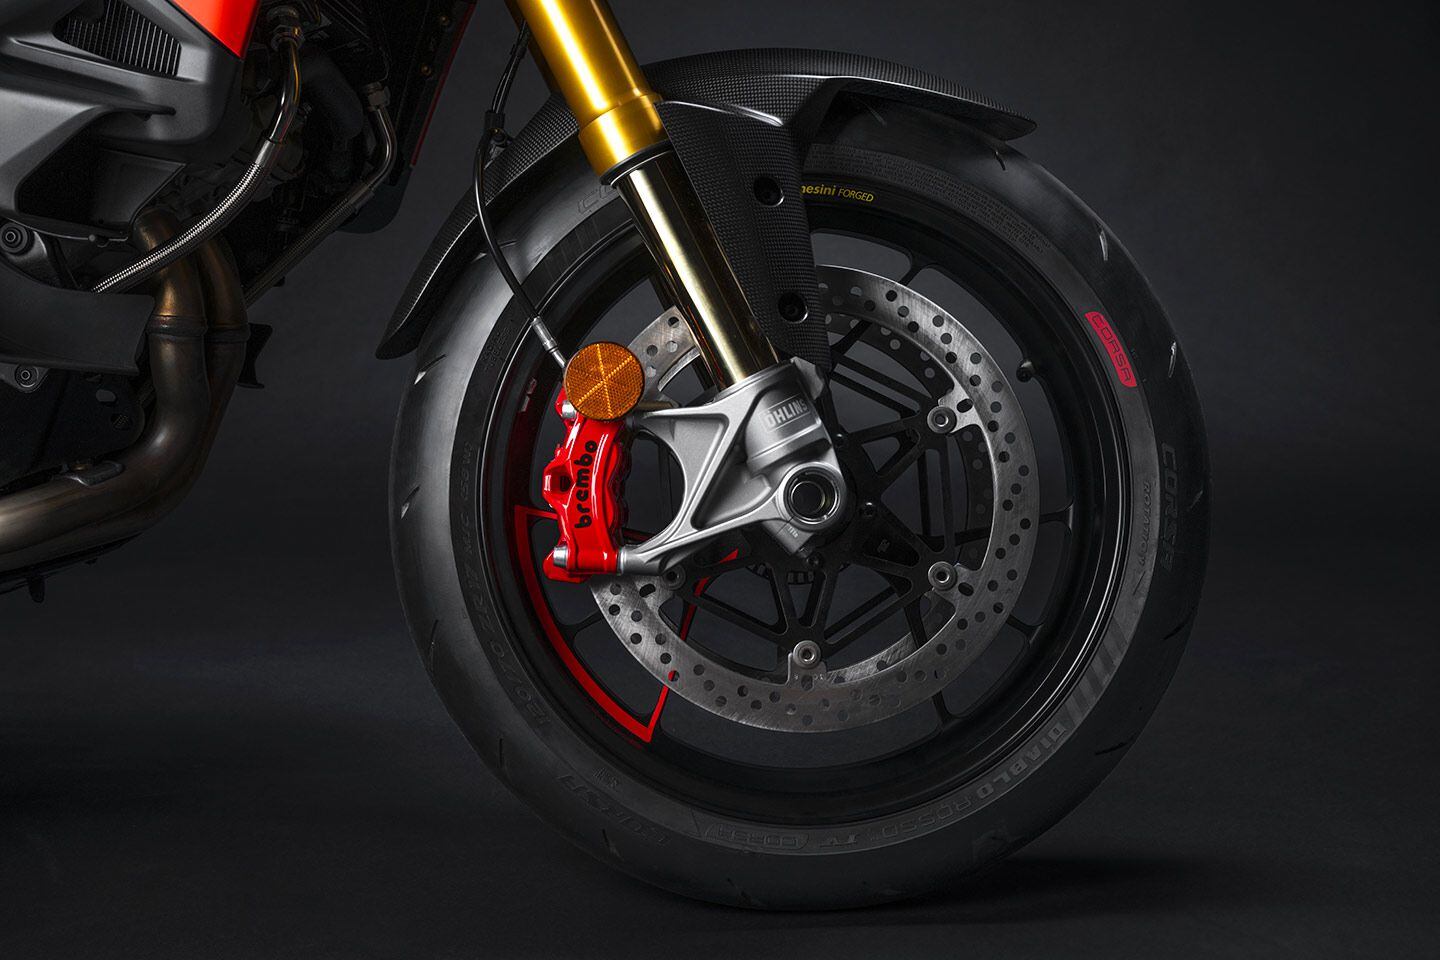 Brembo Stylema calipers and 330mm discs are shared with the S and Pikes Peak Multis, and are more than capable for fade-free trackday shredding.